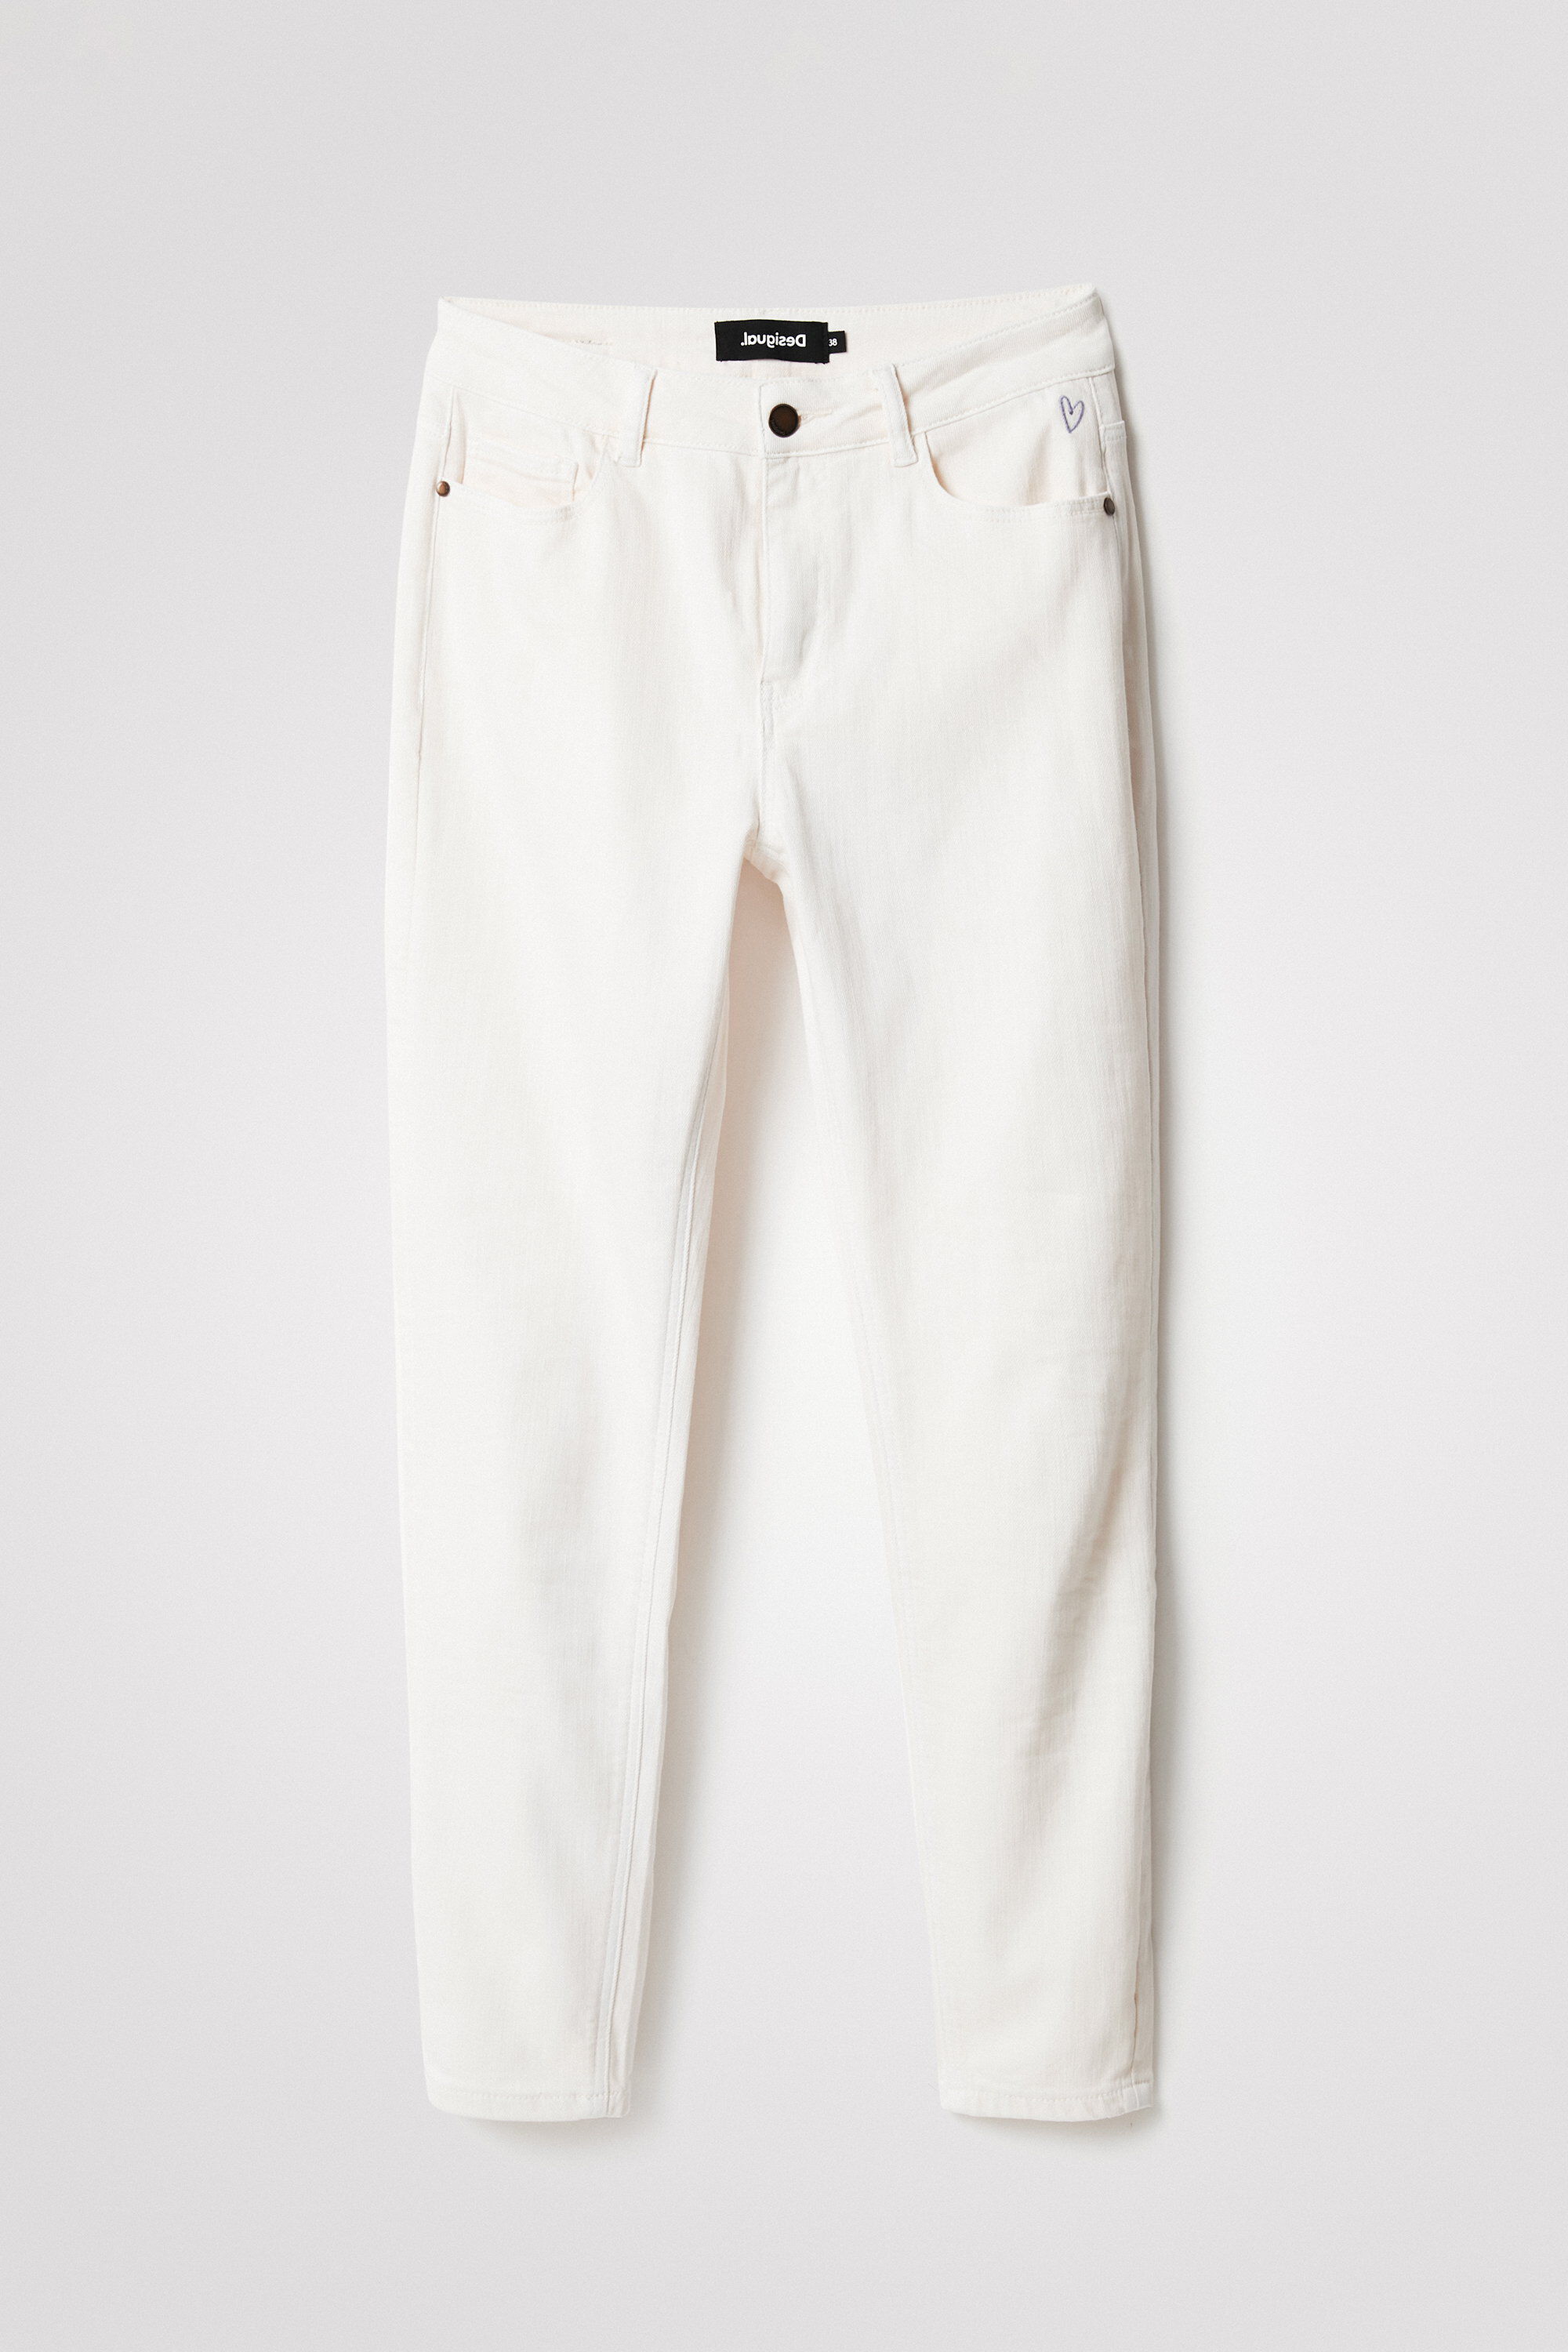 Desigual Skinny Ankle Jeans In White